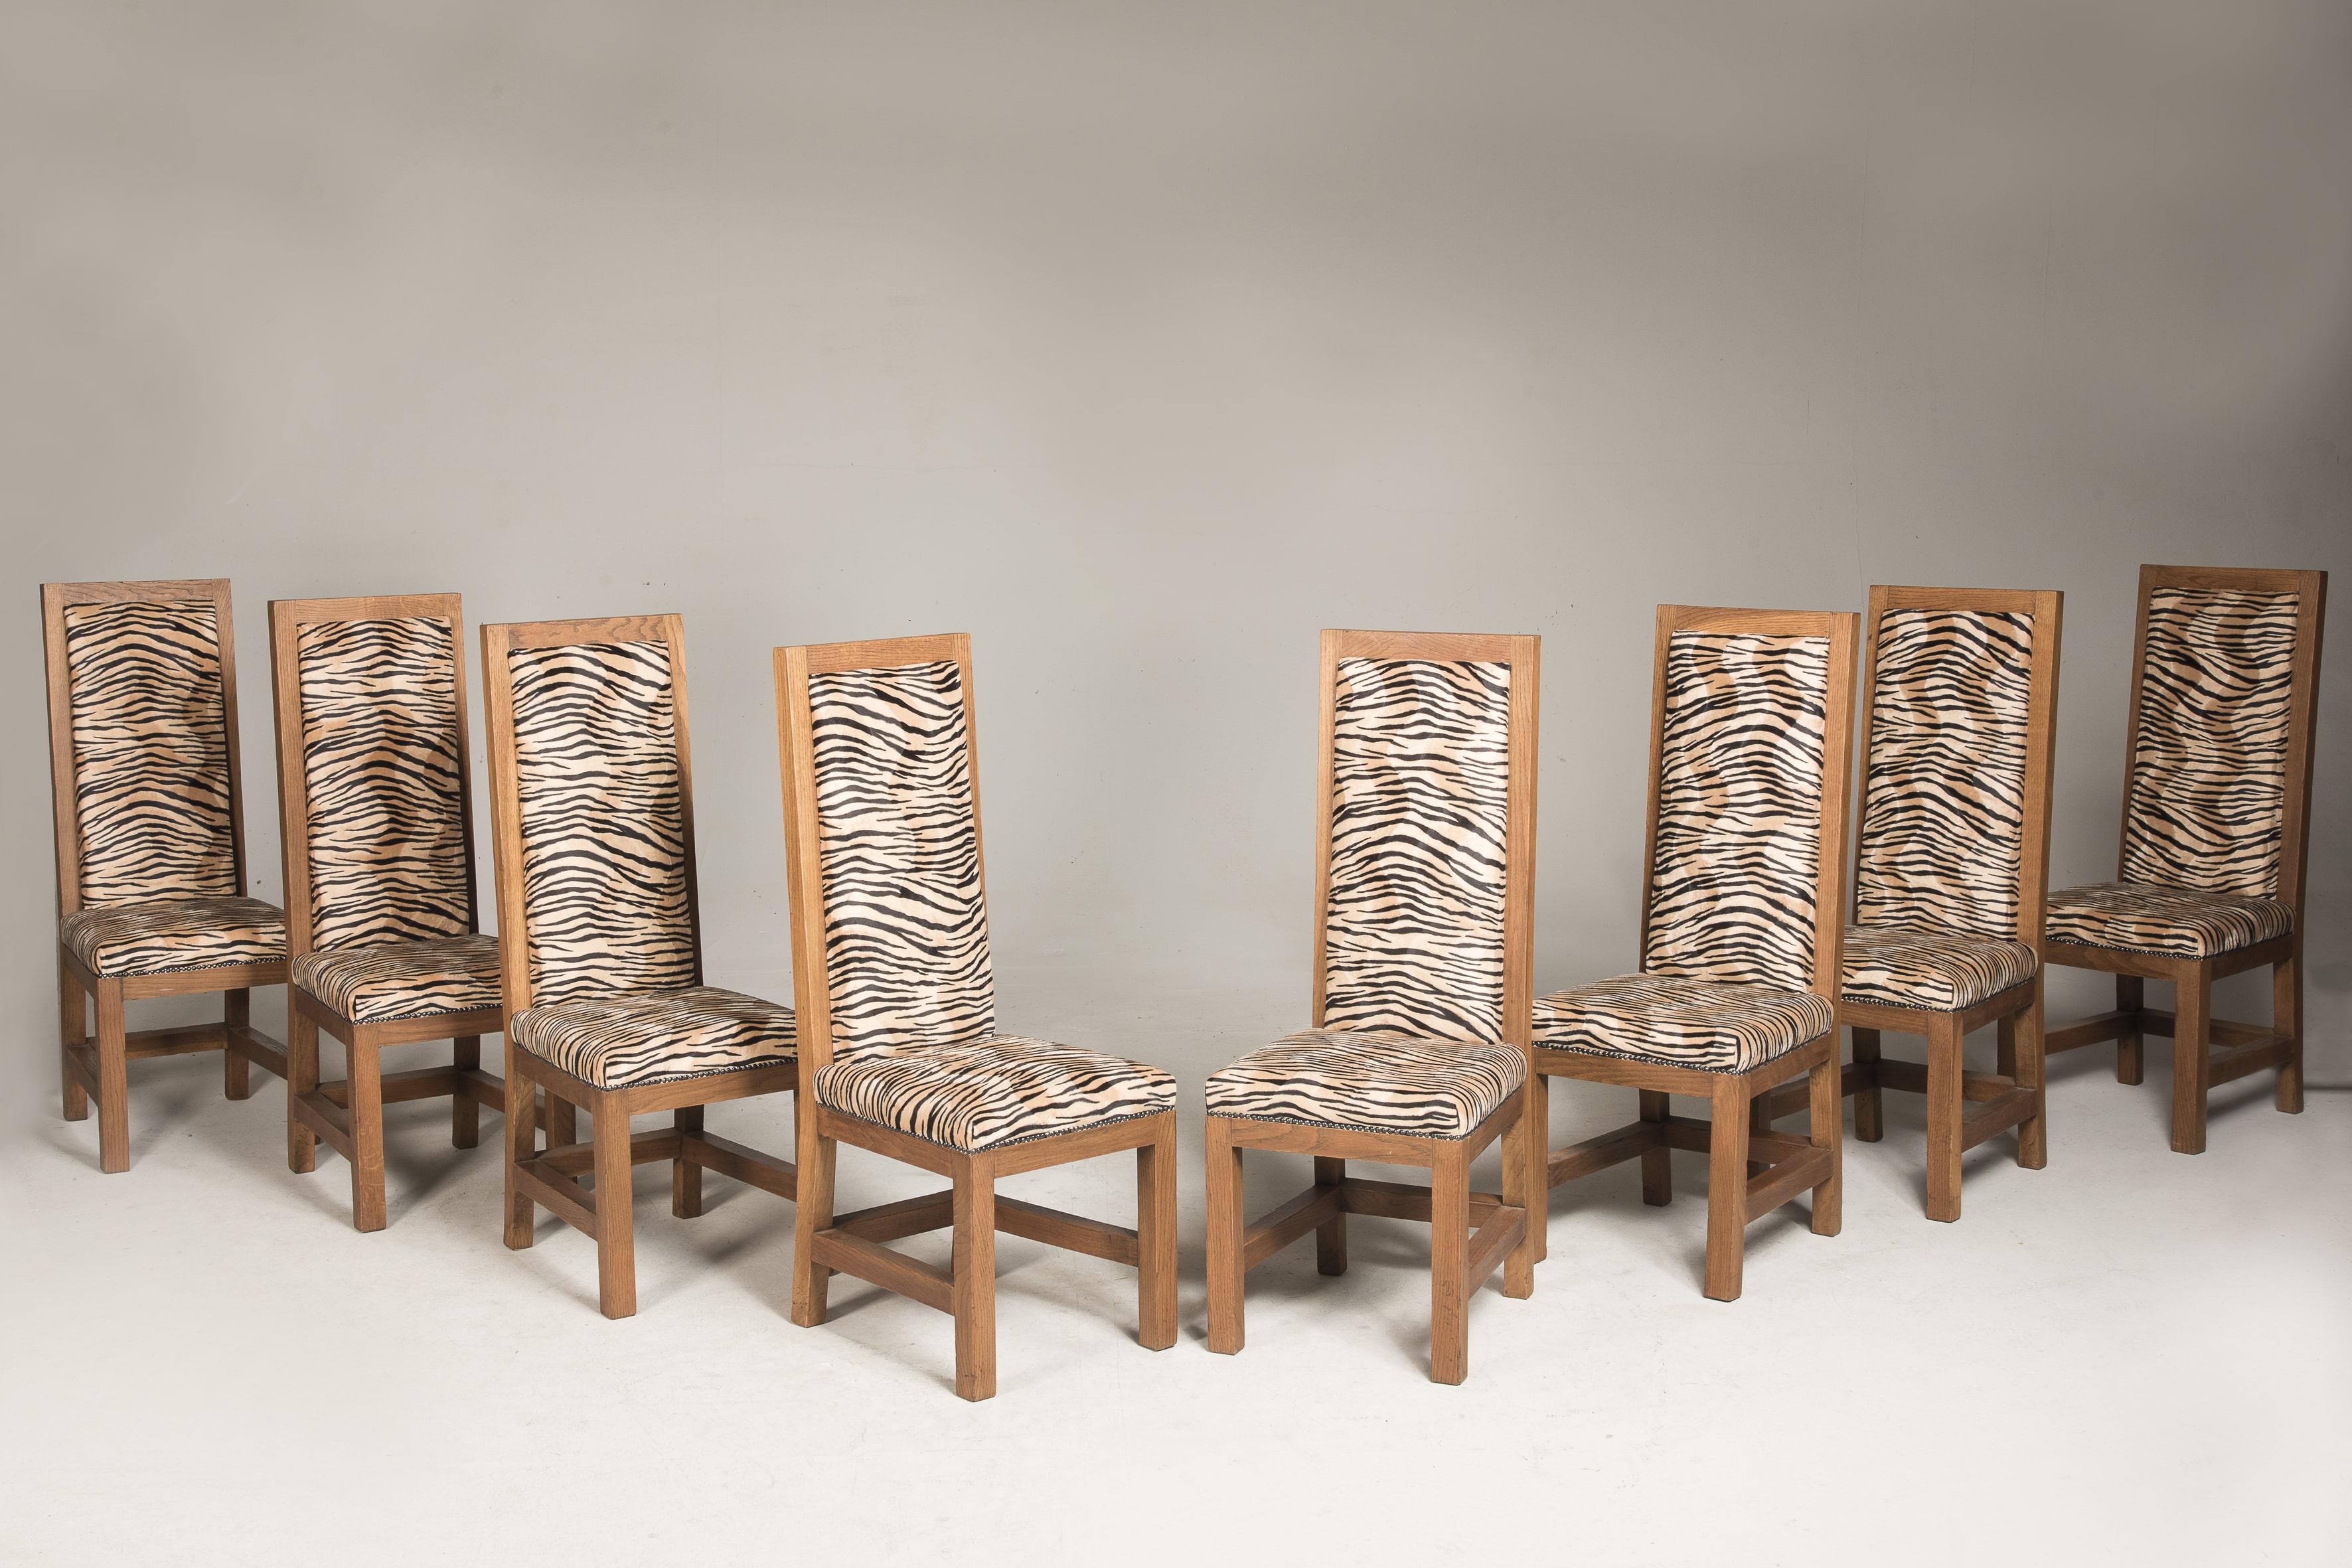 Set of eight Art Deco oak chairs with original patina, wax finish, from France.
Recent tiger upholstery. 

